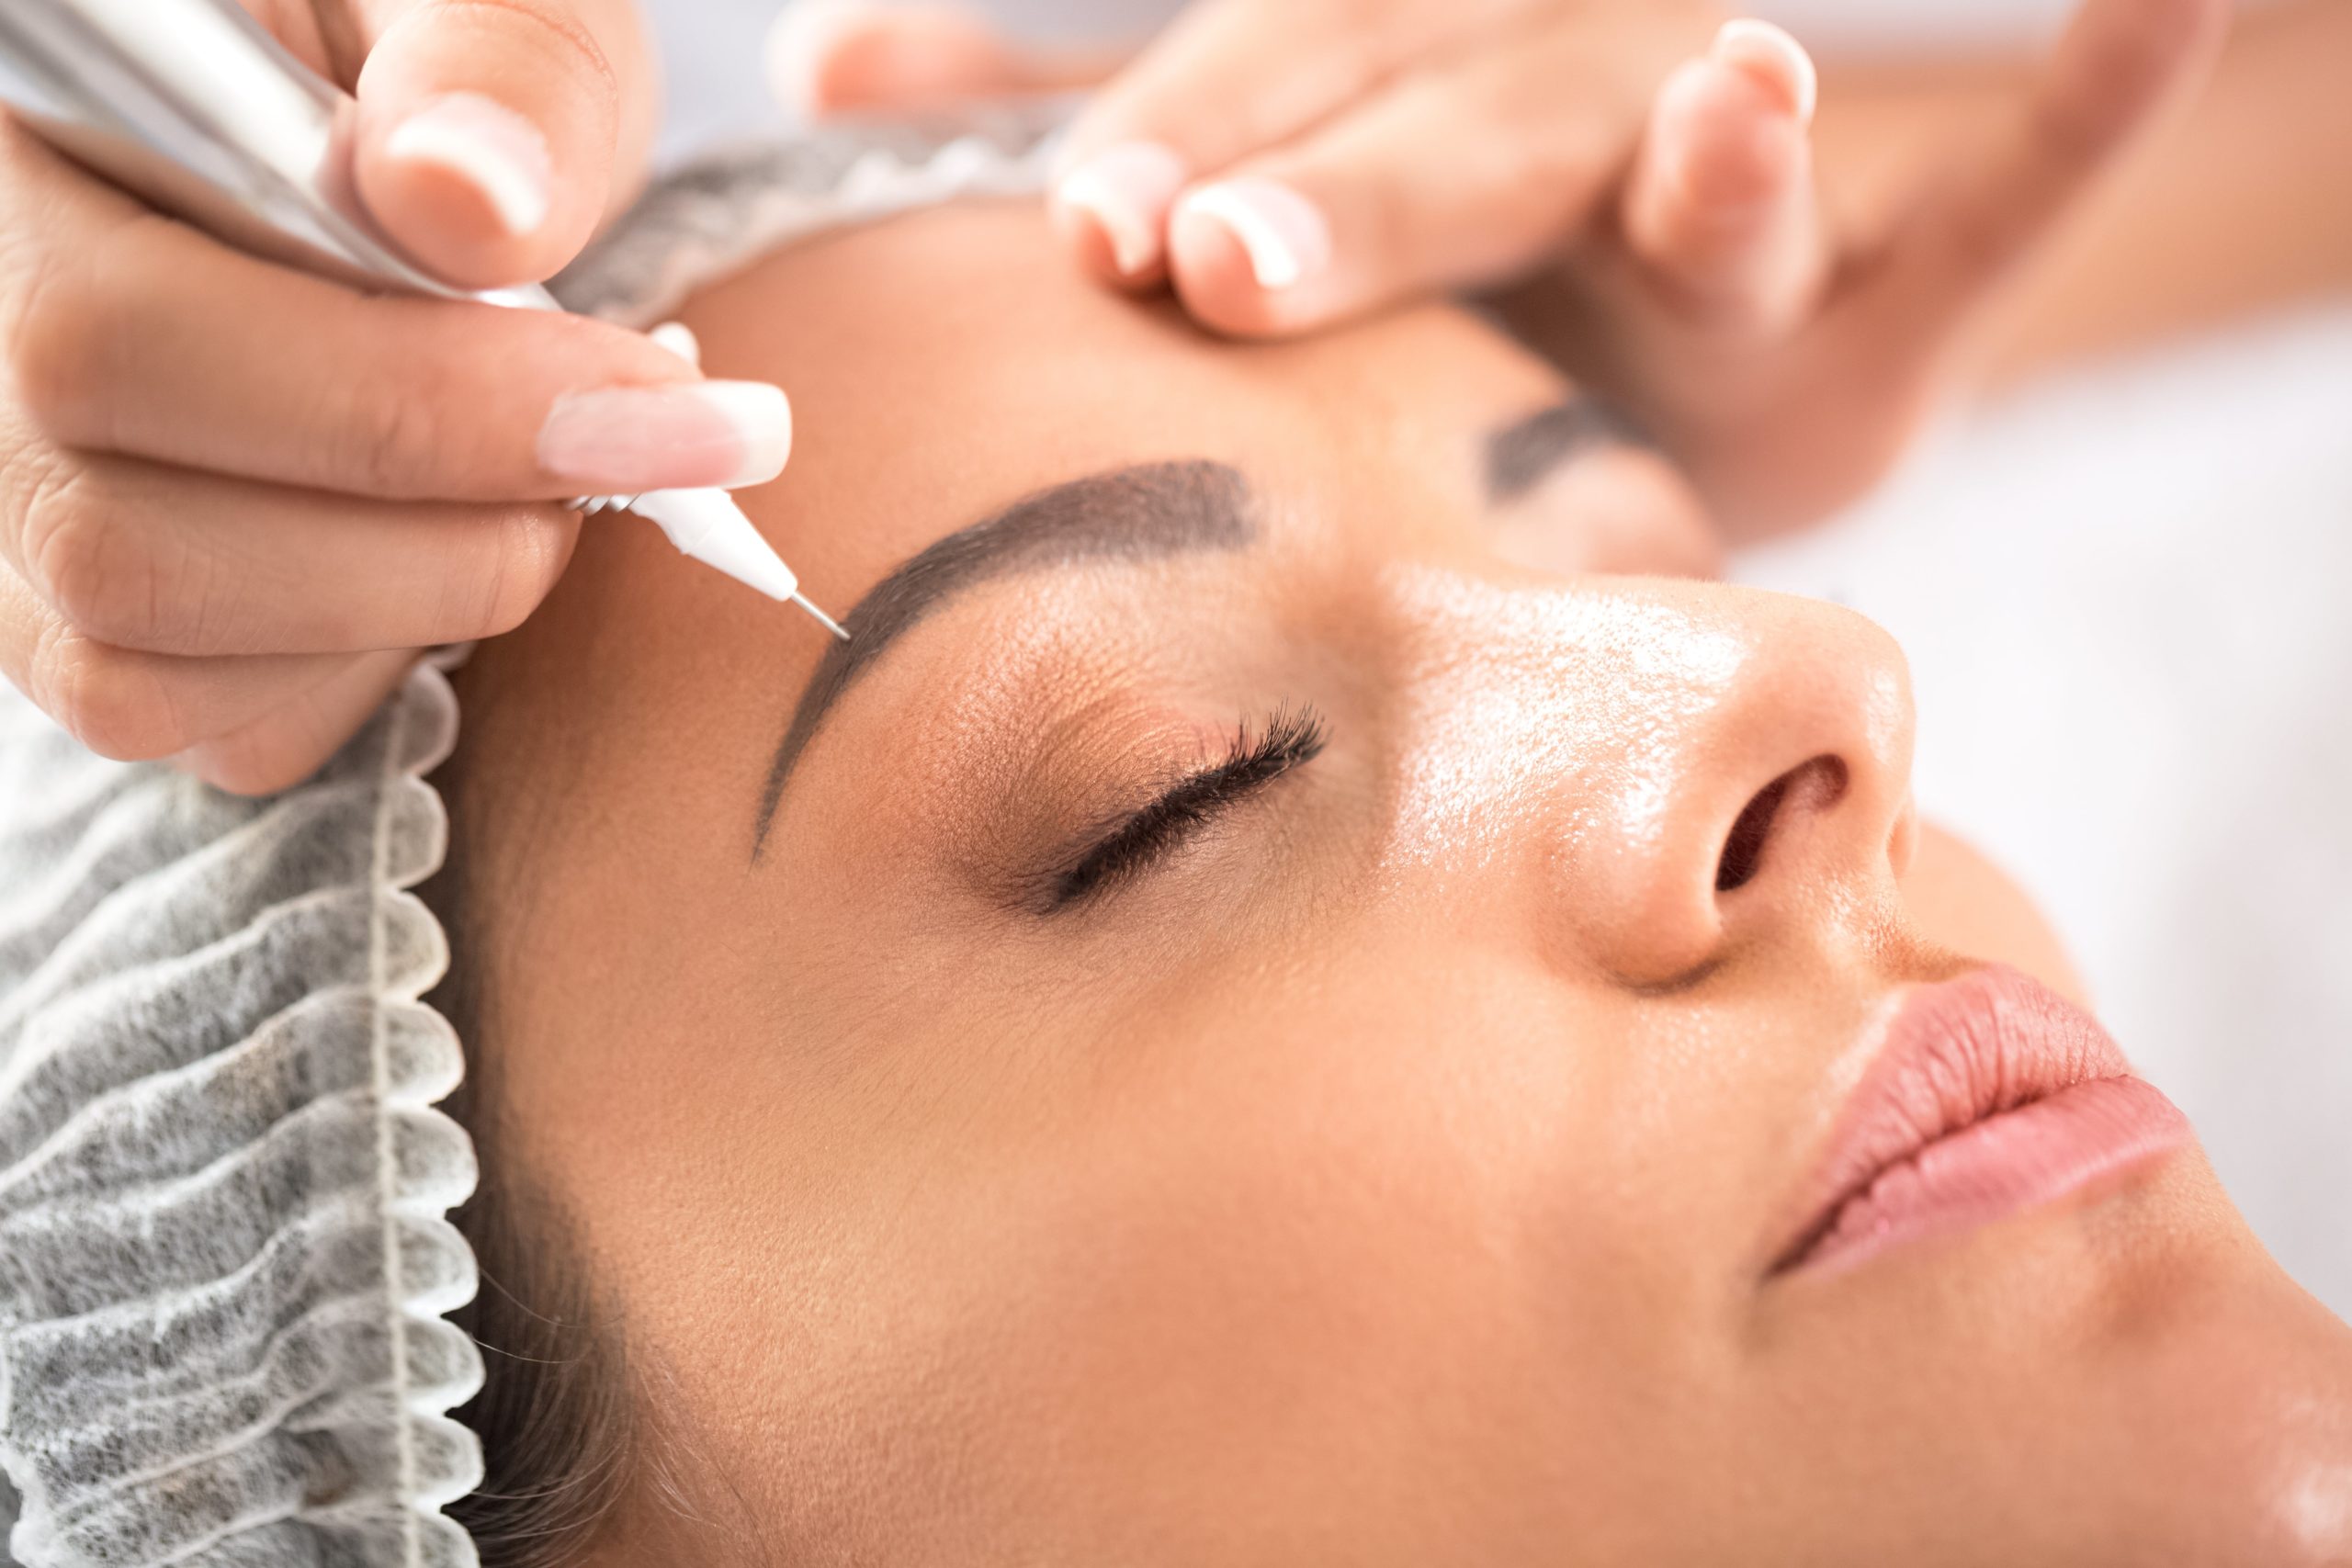 Microblading Of Eyebrows And Permanent Makeup | Absolute Health Care | Newnan GA